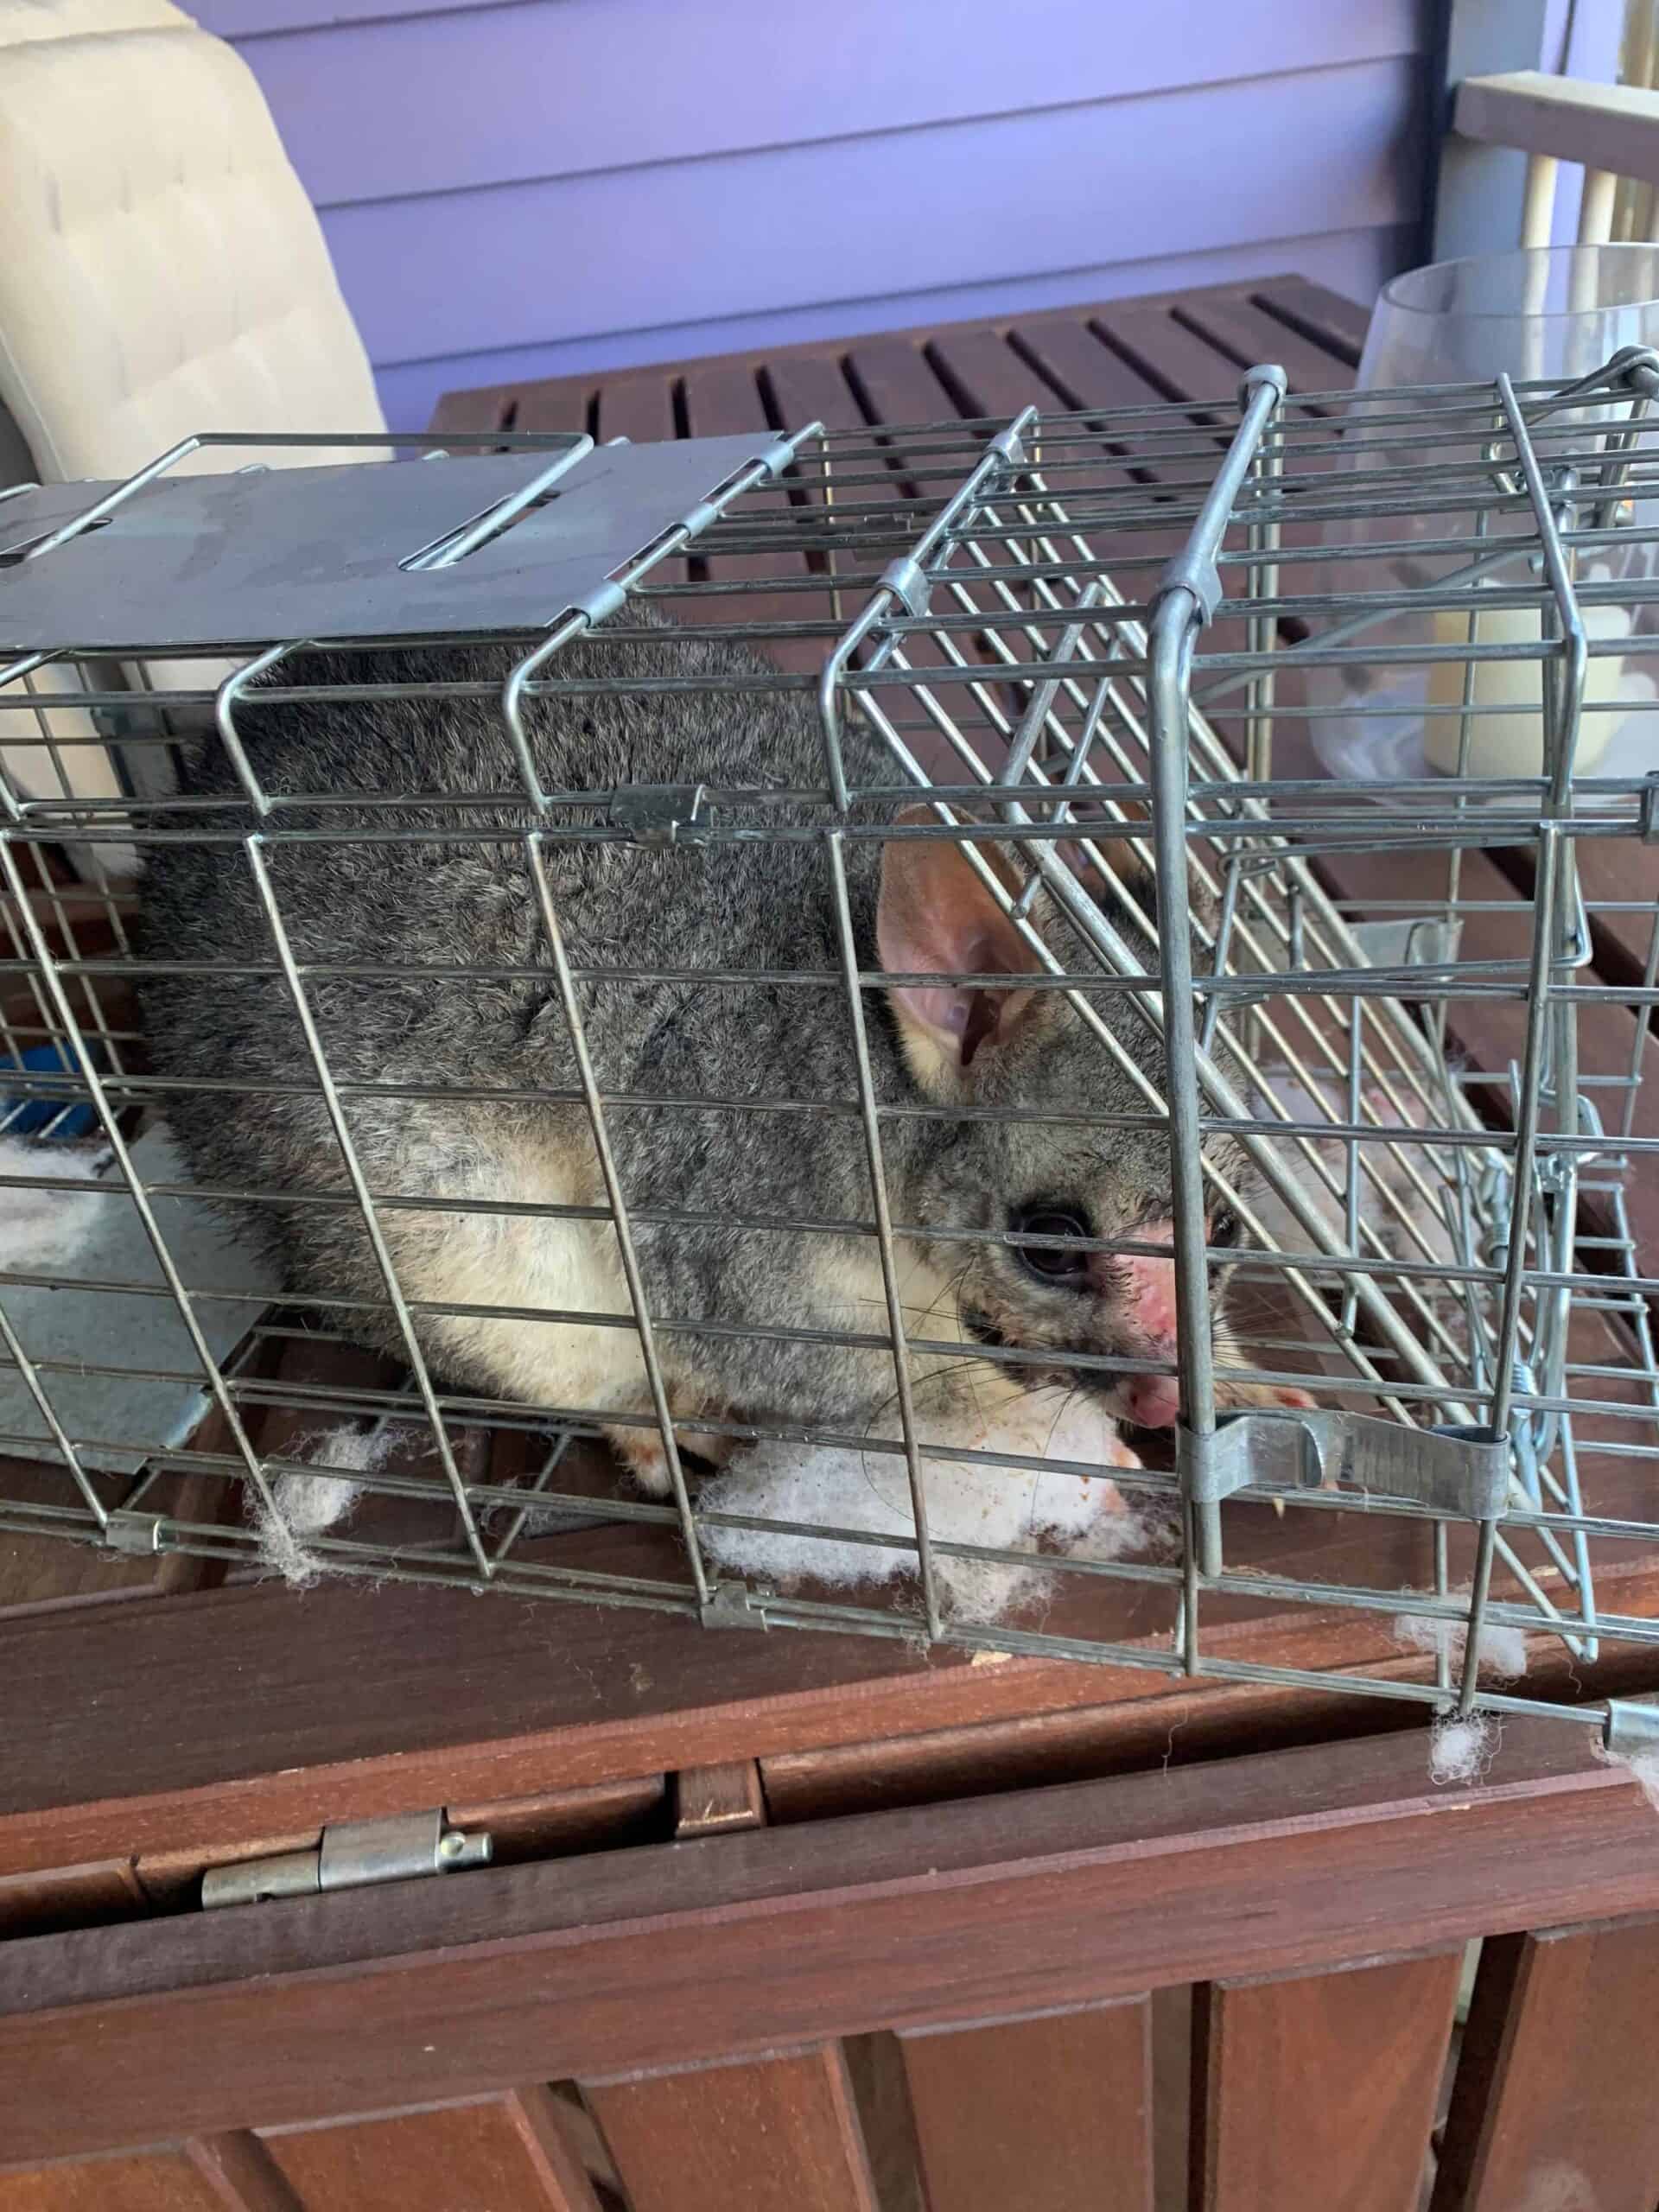 Possum in Cage after removal in Toowoomba